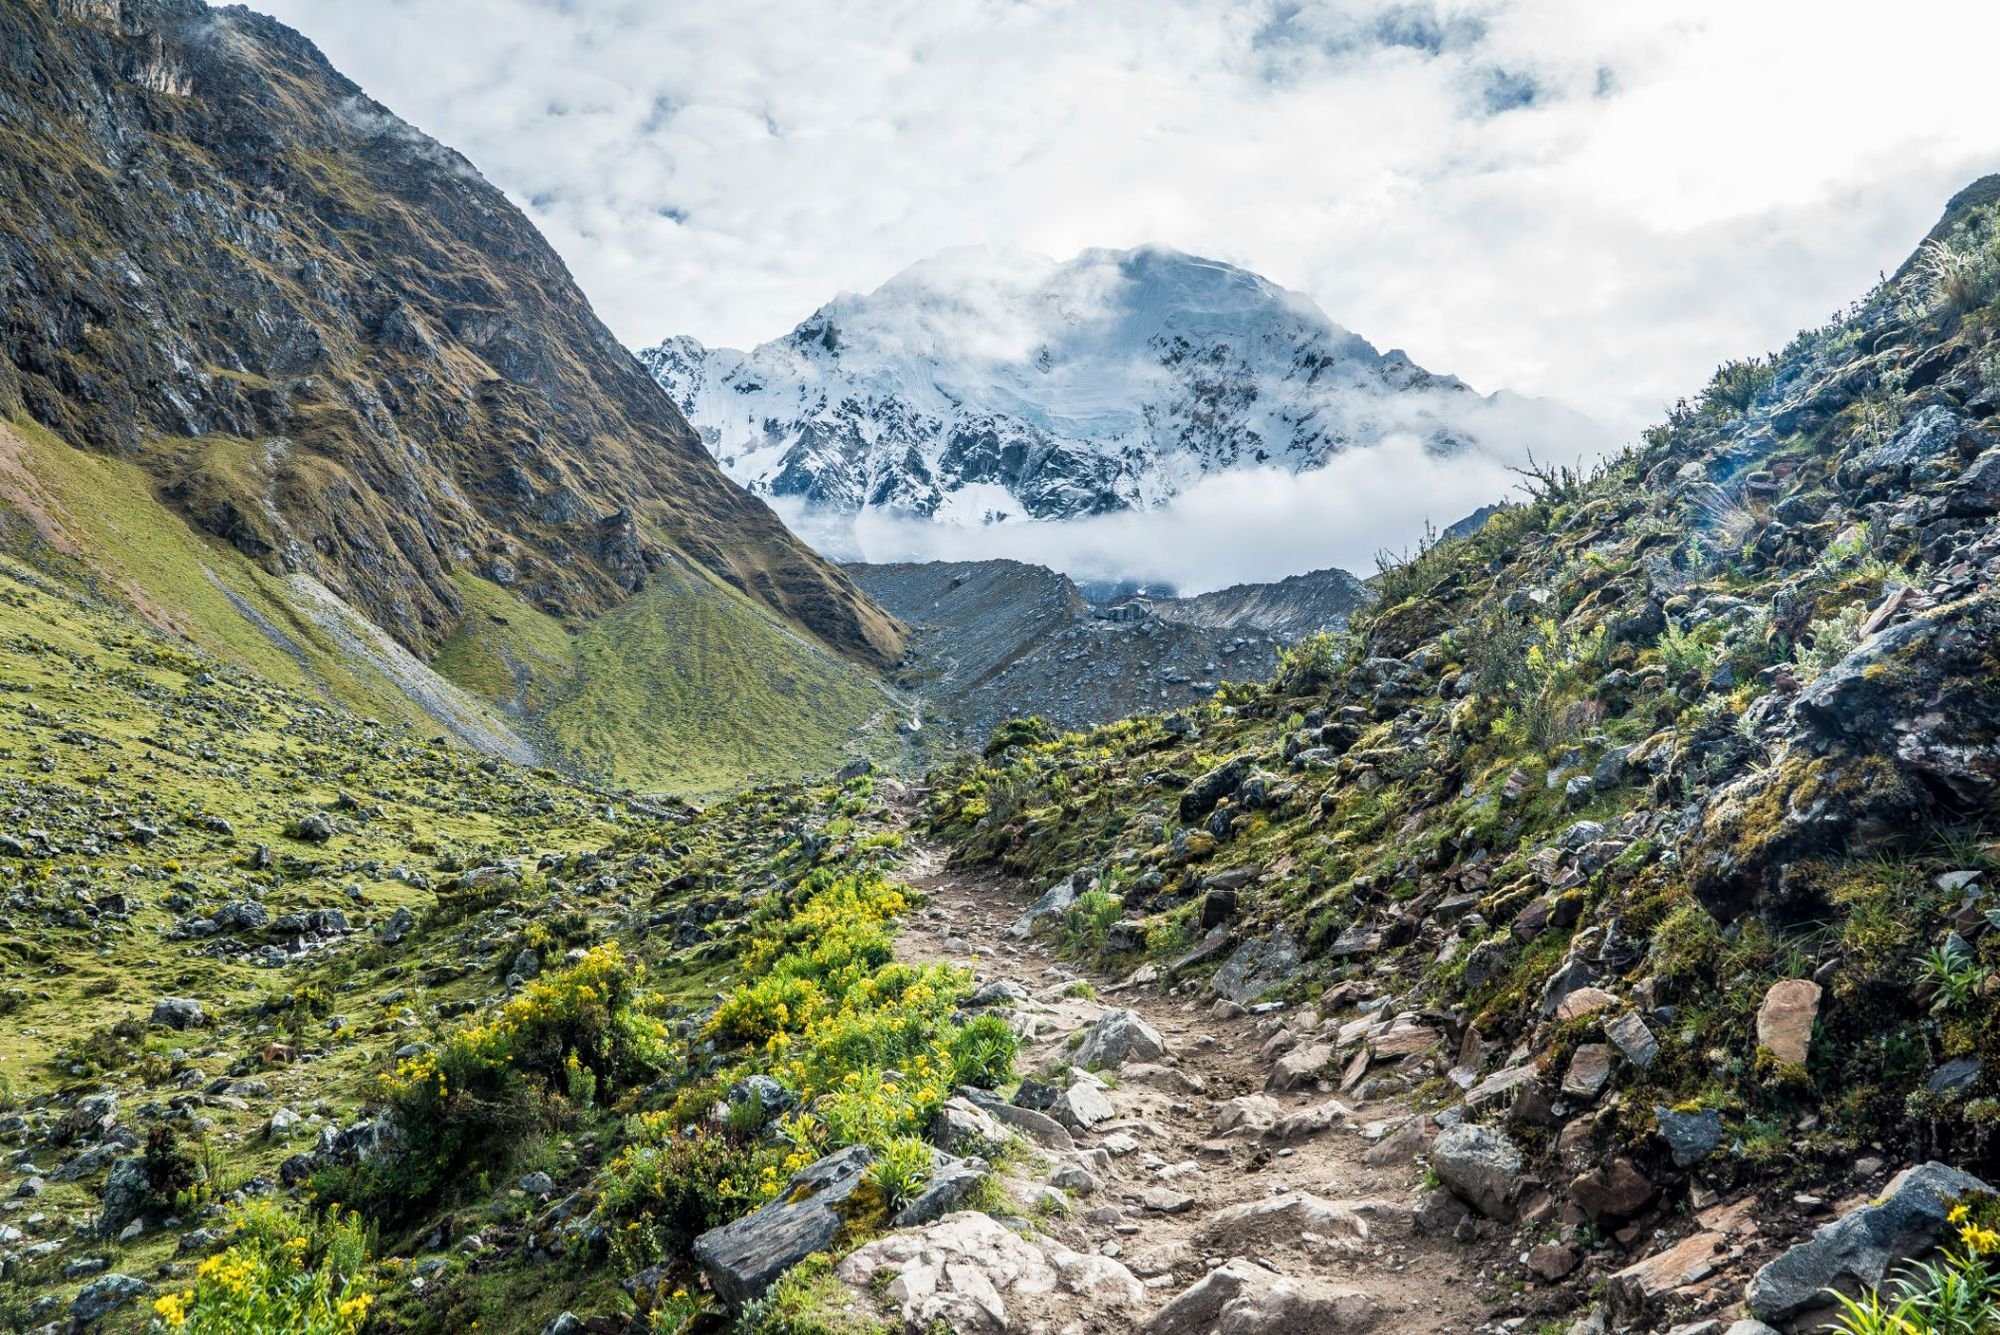 The long and winding road through the mountains, with the Salkantay mountain itself up ahead in the snow. Photo: Getty